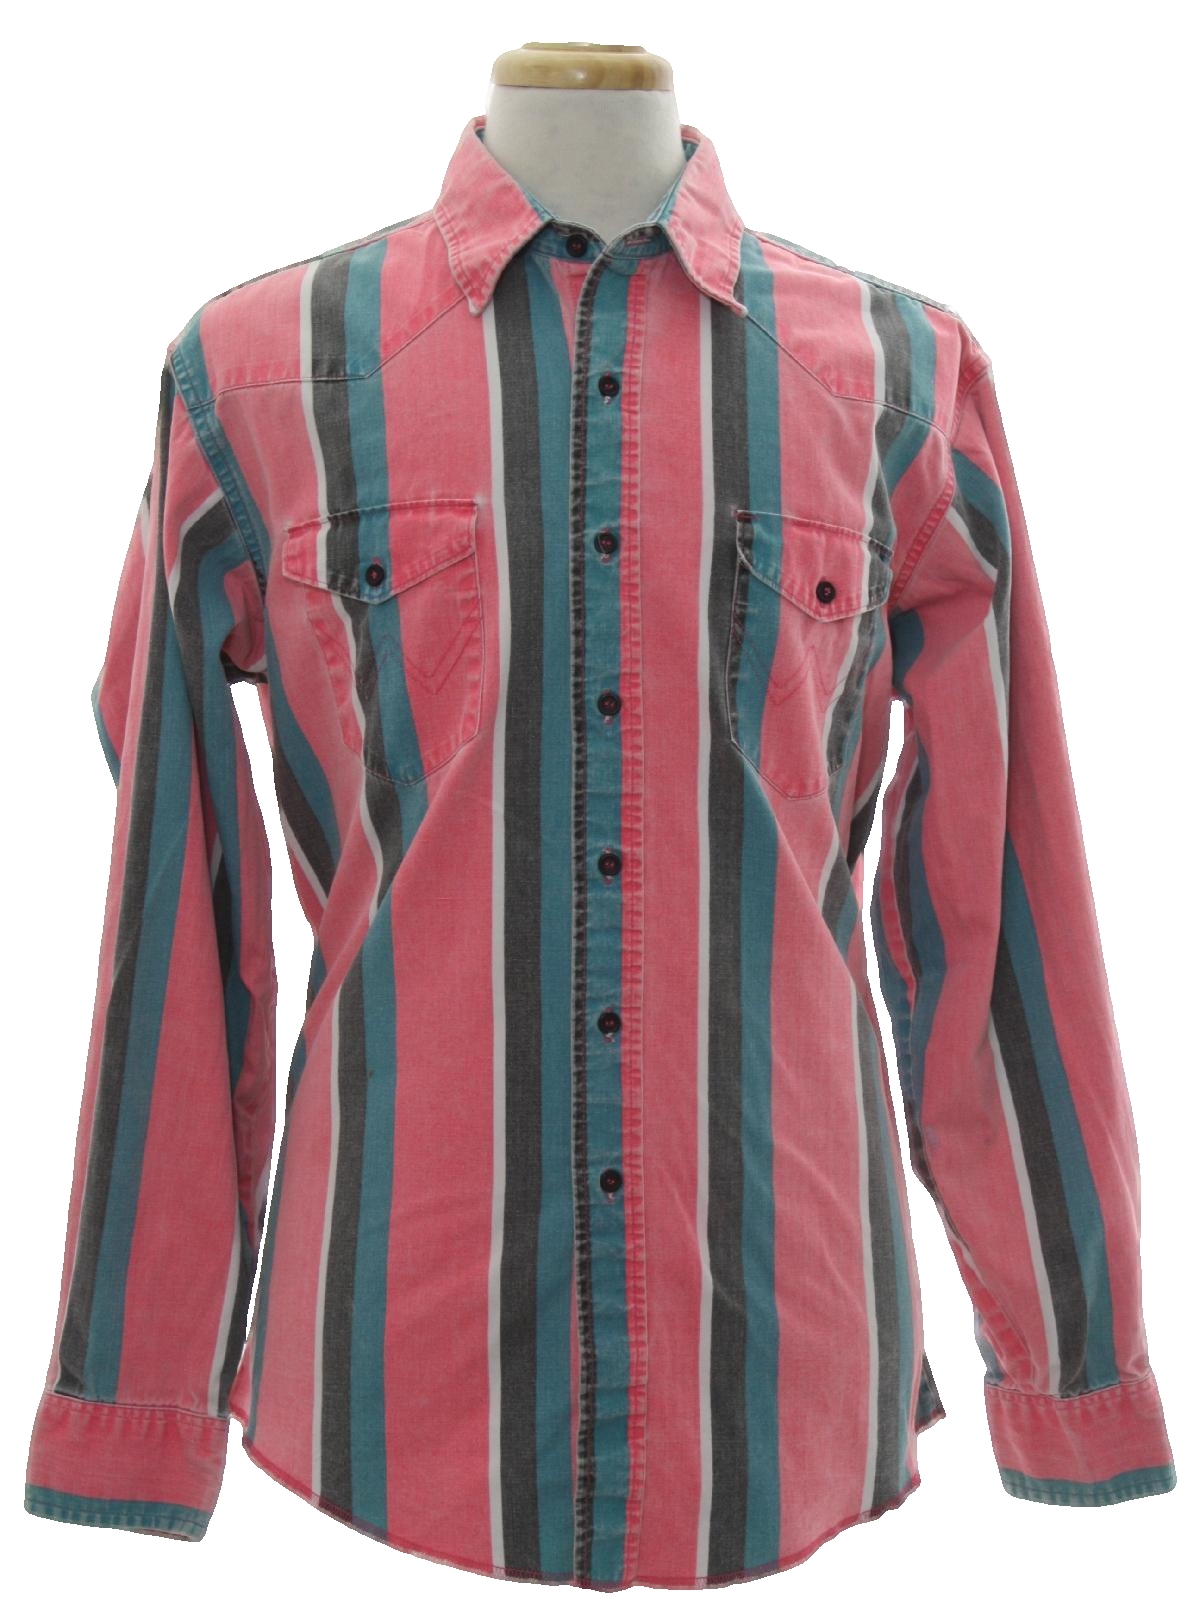 Wrangler Nineties Vintage Western Shirt: 90s -Wrangler- Mens lightly faded  pink, teal green, black and white striped background cotton longsleeve,  button front wicked 90s geometric print western shirt with small fold over